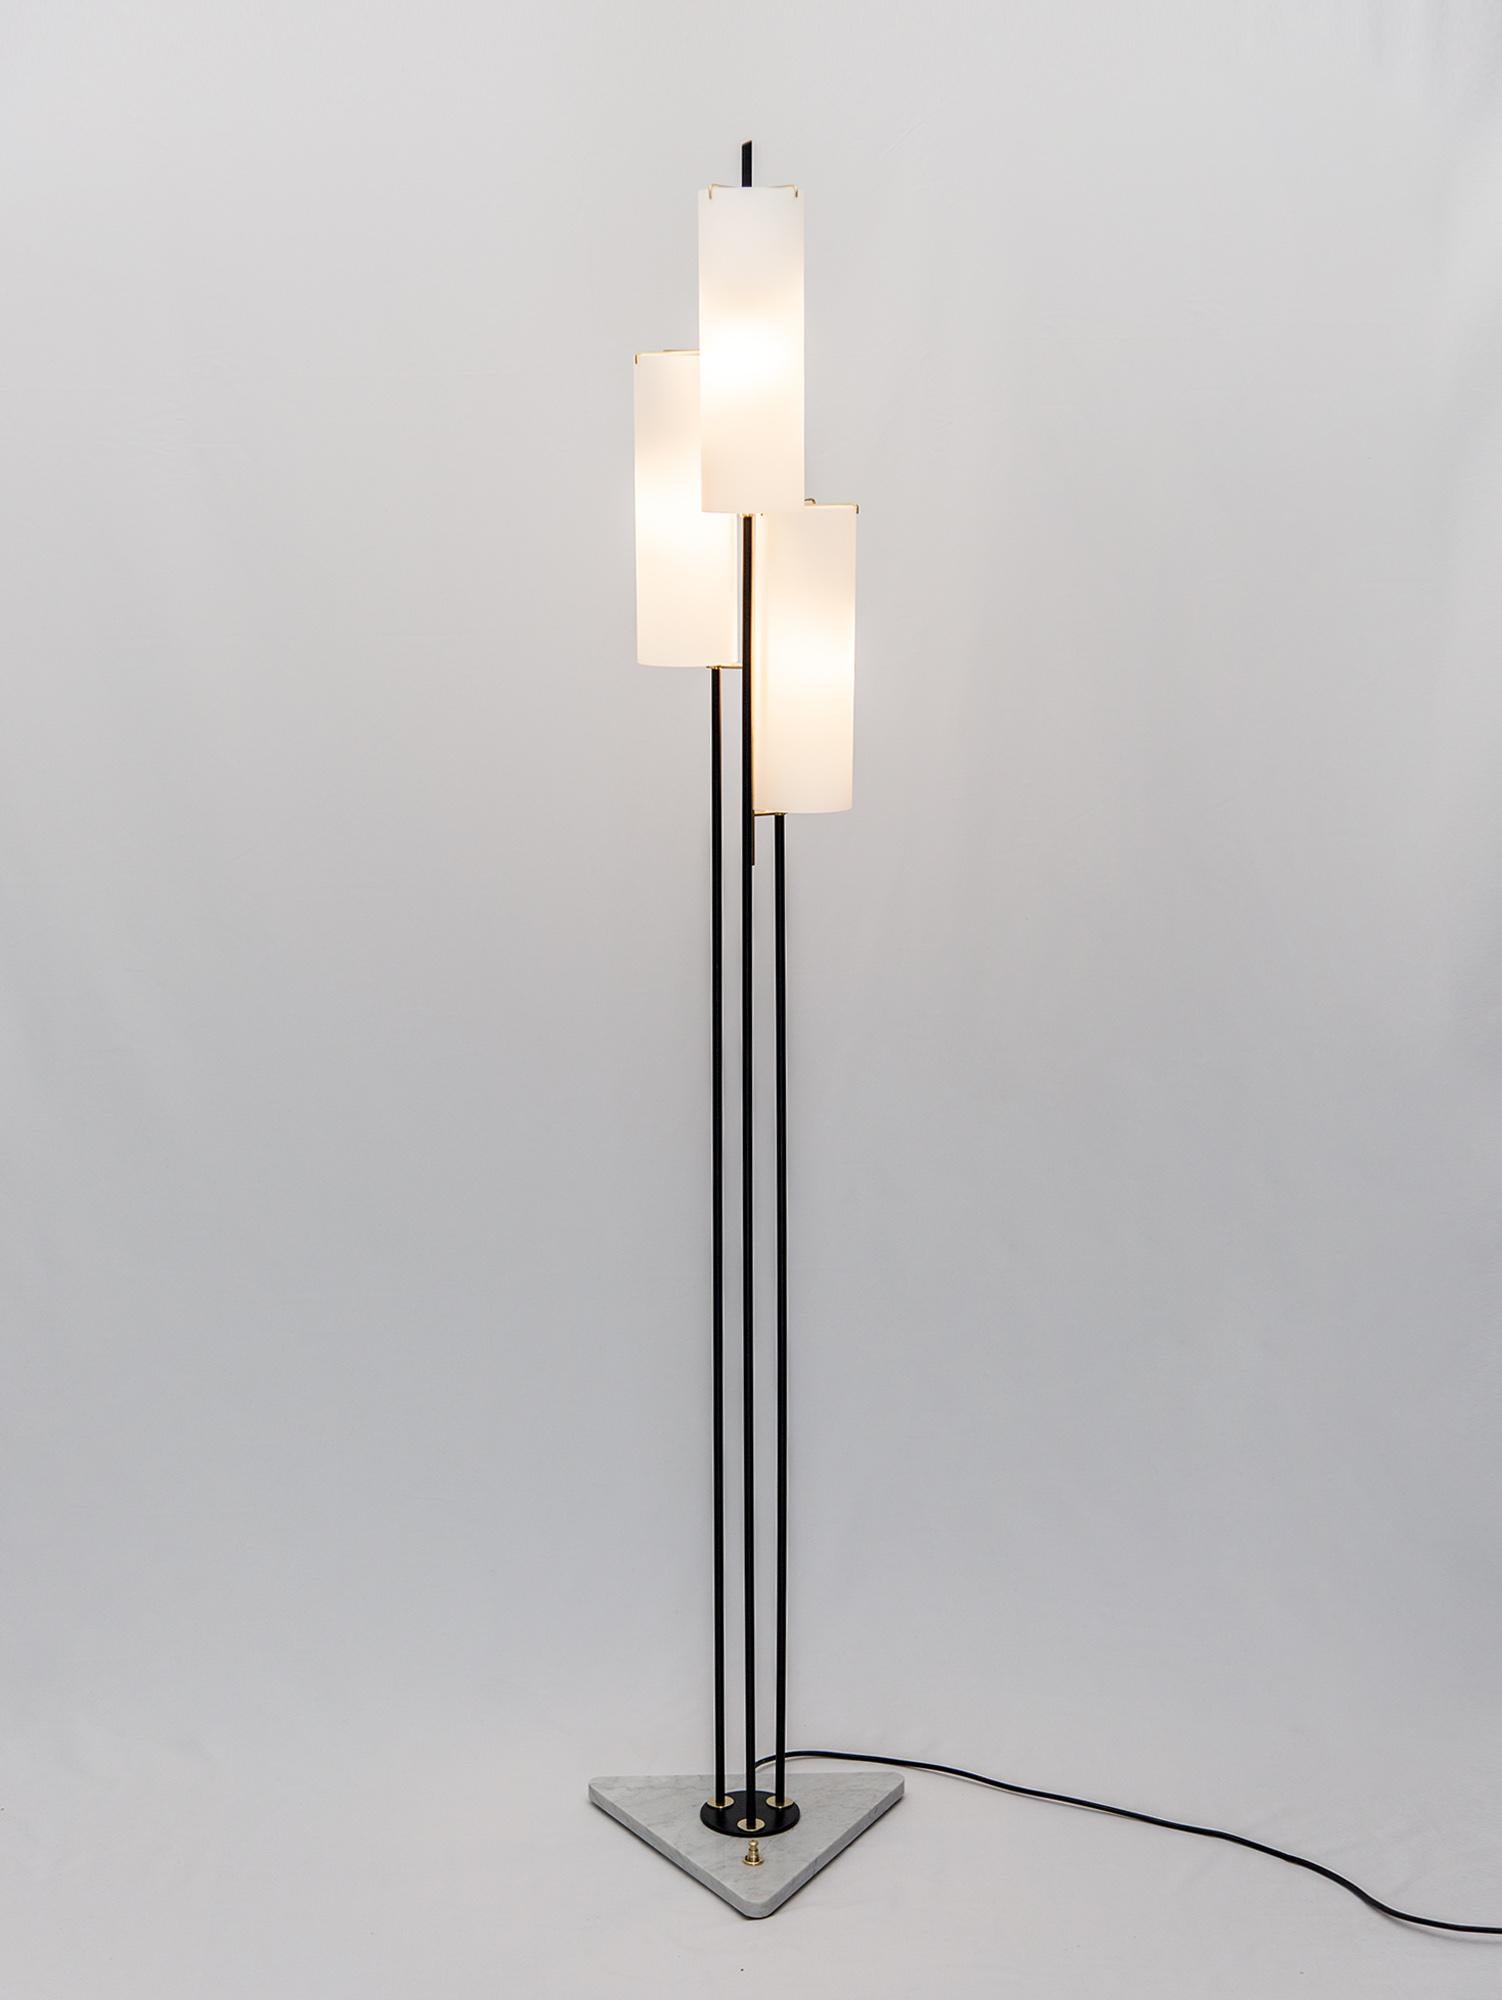 Stunning tall floor lamp by Stilnovo. The three cascading milky glass shades emit a soft ambient light and are held by beautifully crafted brass fixtures. A brass light switch is integrated in the triangular Carrara marble base. Made in Italy, circa